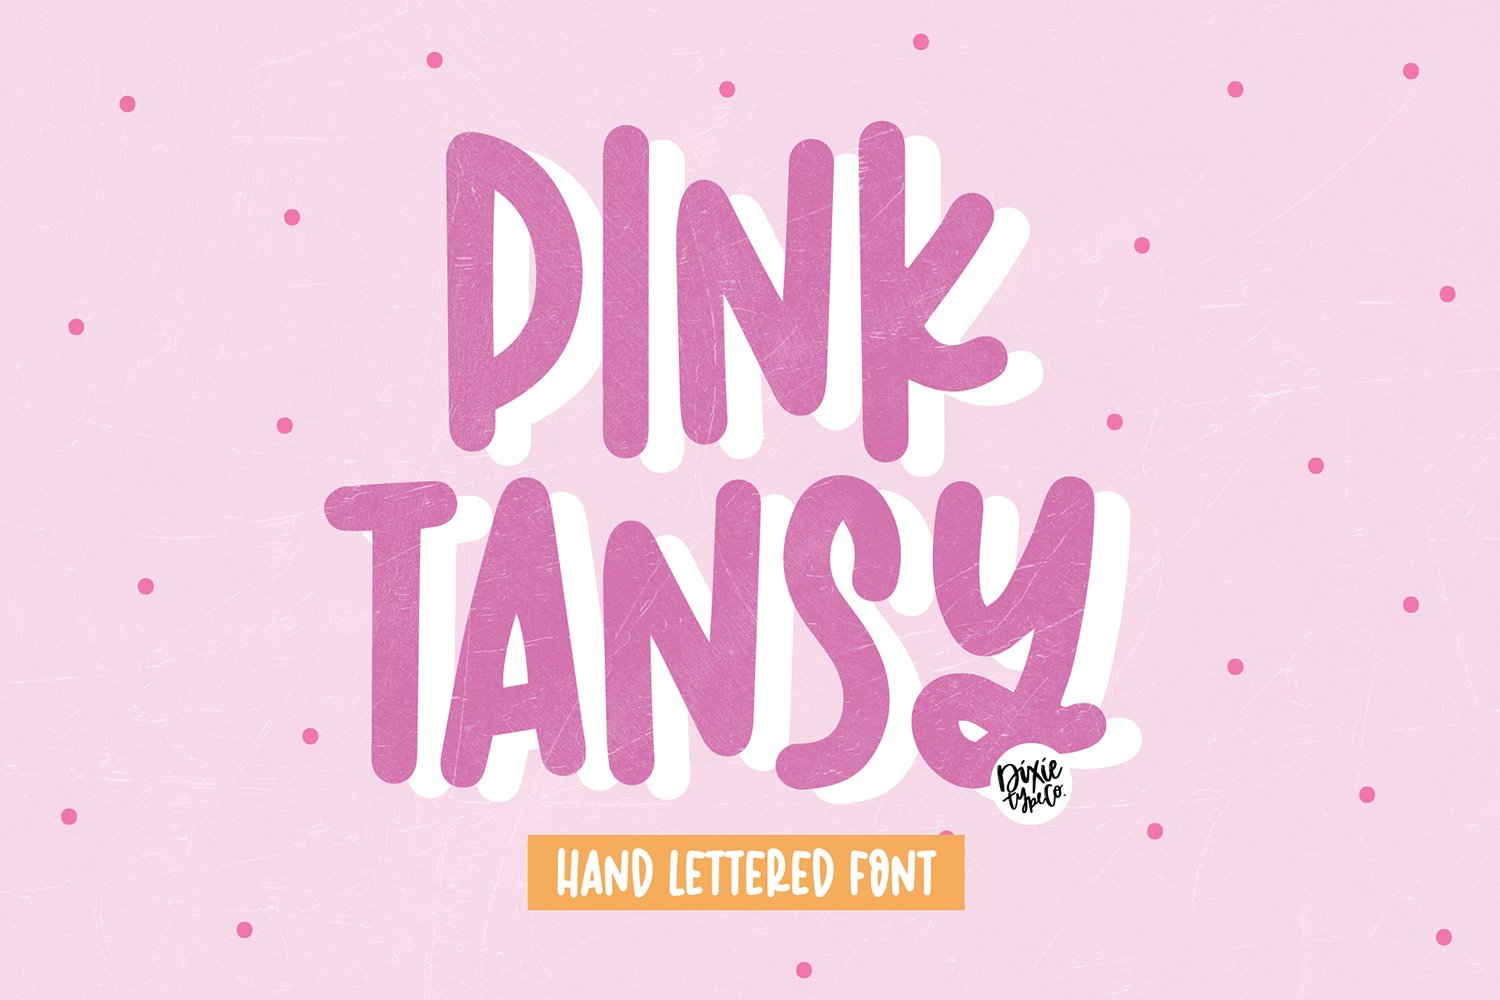 PINK TANSY Cute Sans Font cover image.